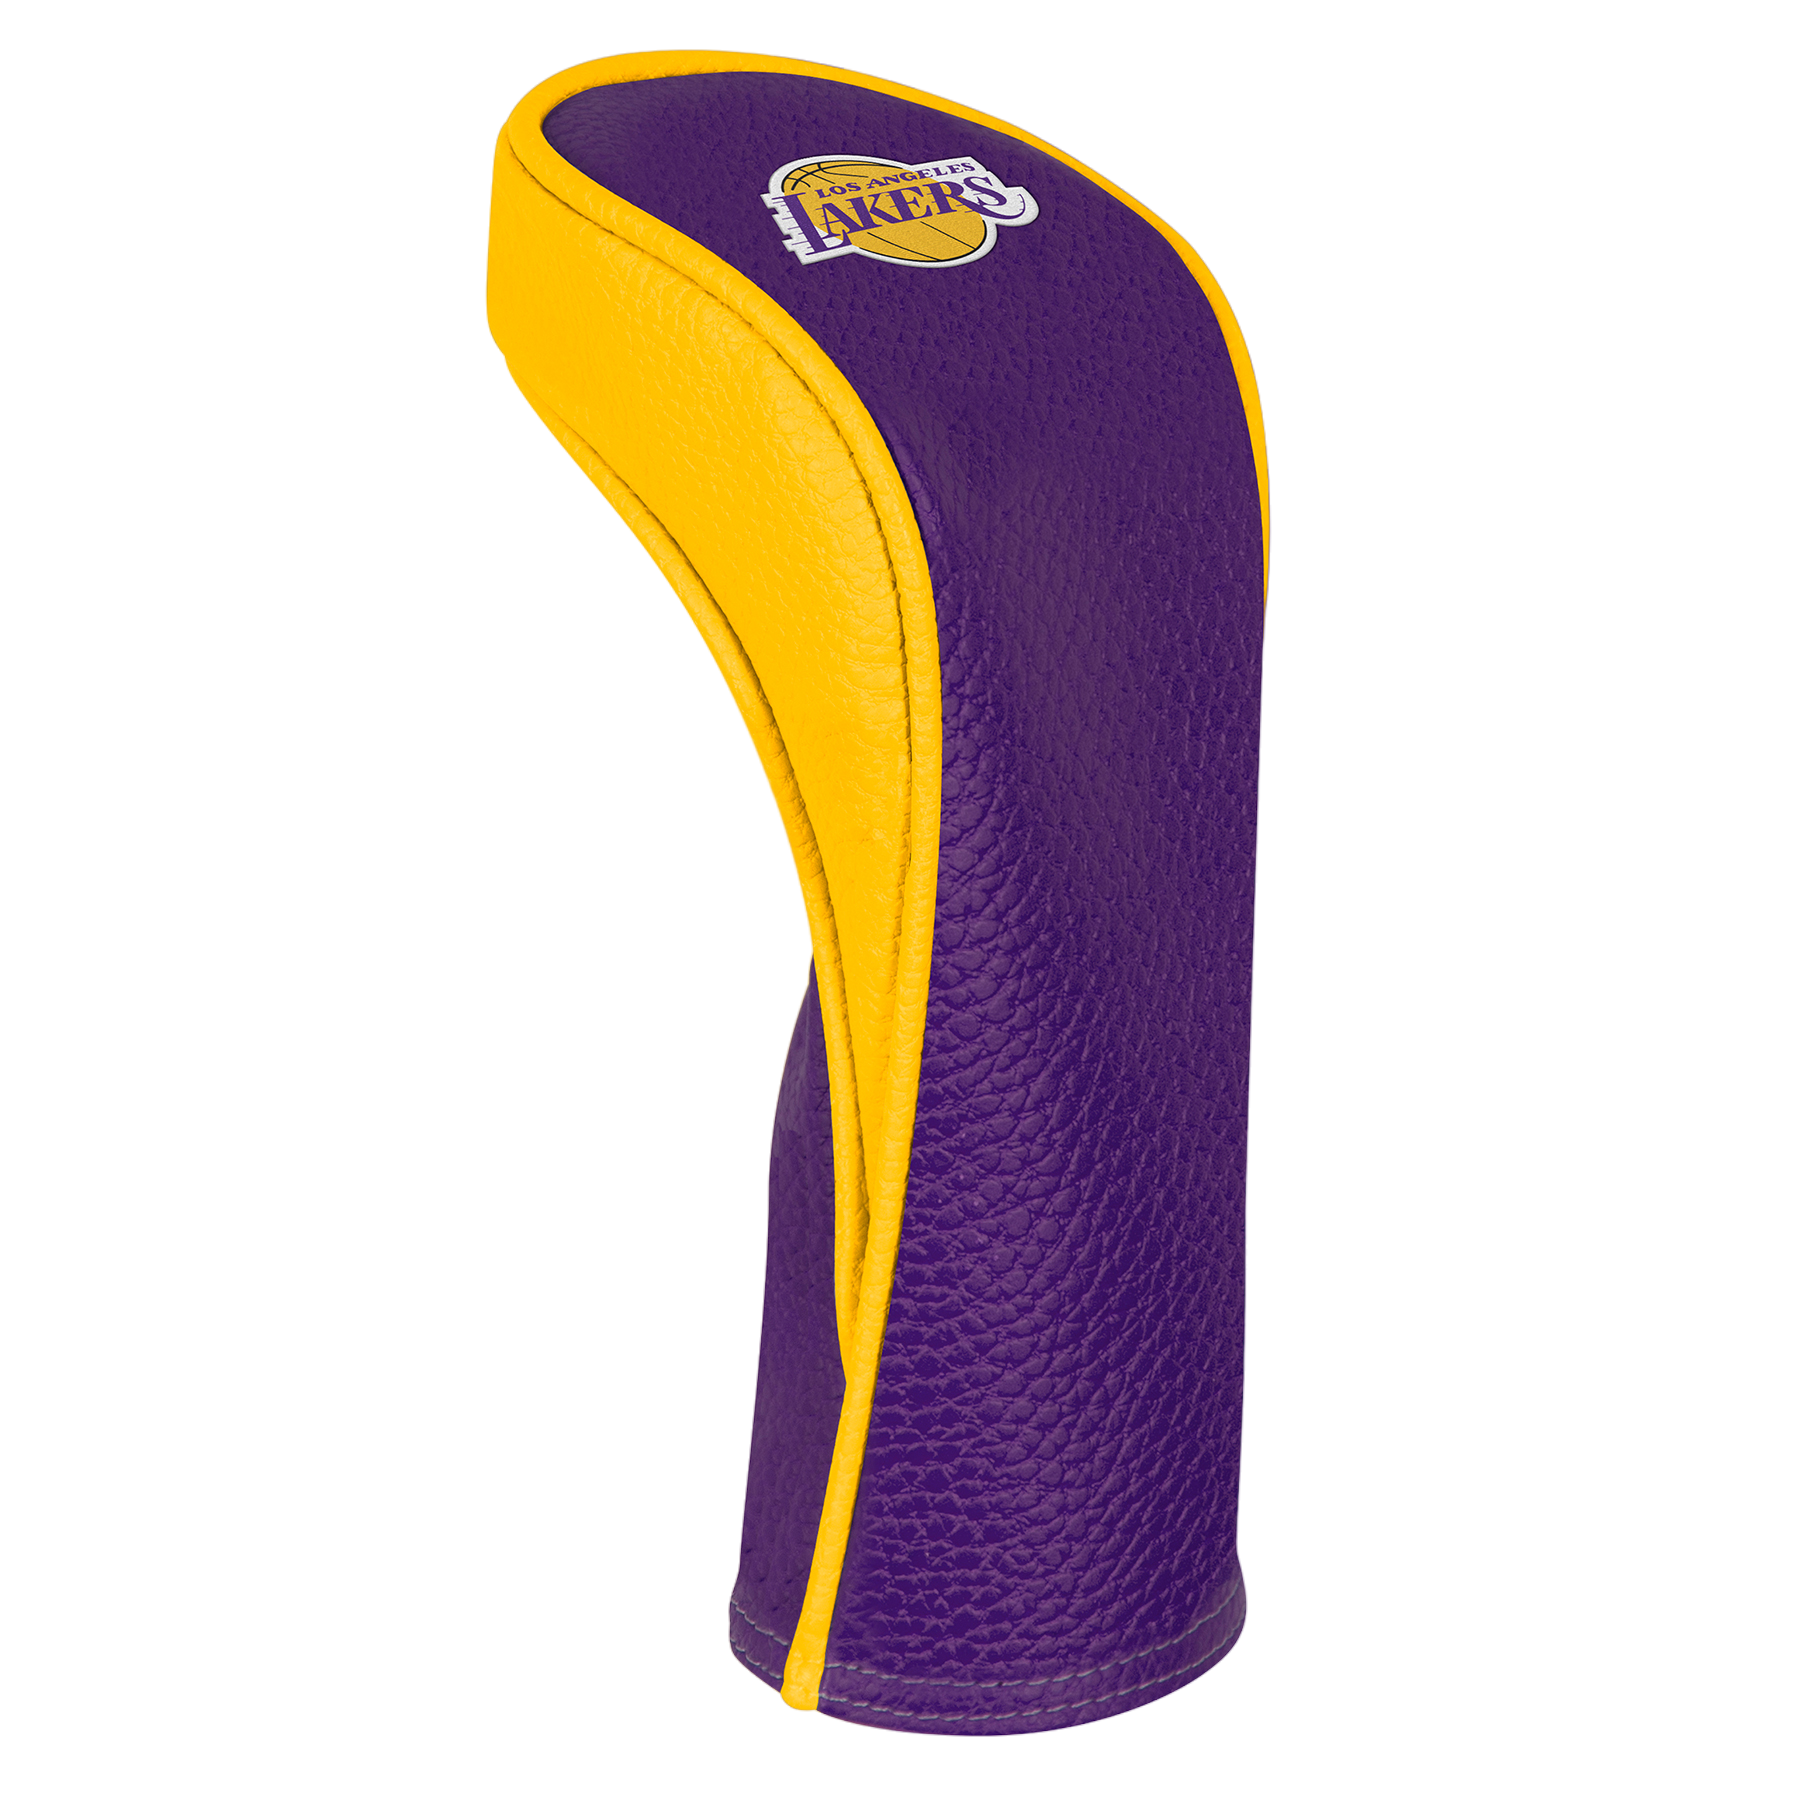 Los Angeles Lakers Individual Hybrid Headcover